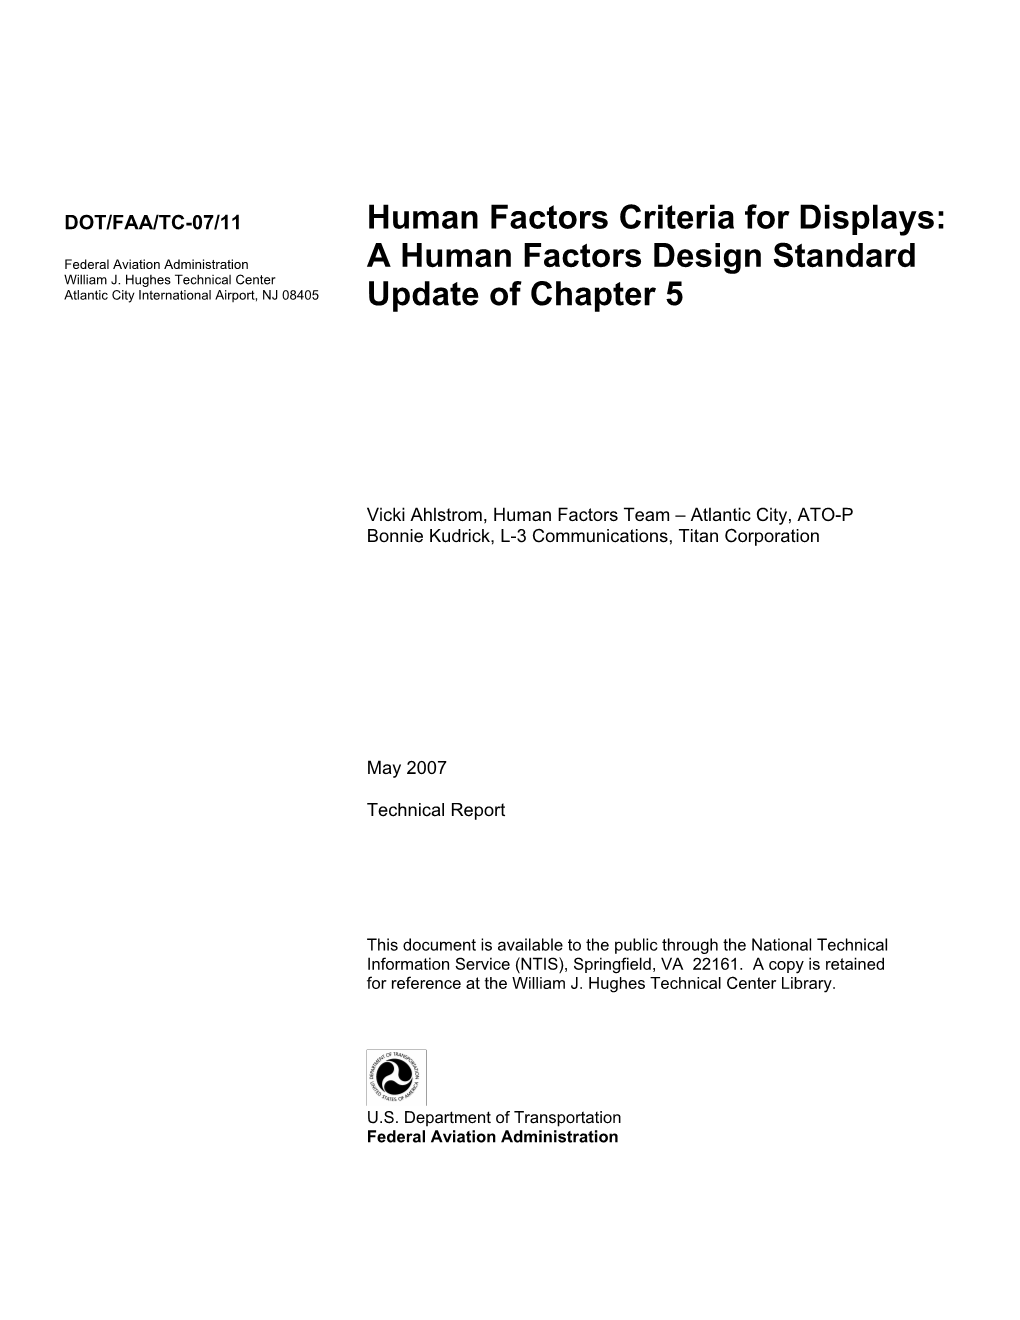 Human Factors Criteria for Displays: a Human Factors Design Standard Update of Chapter 5 Should Be Considered a Living Document